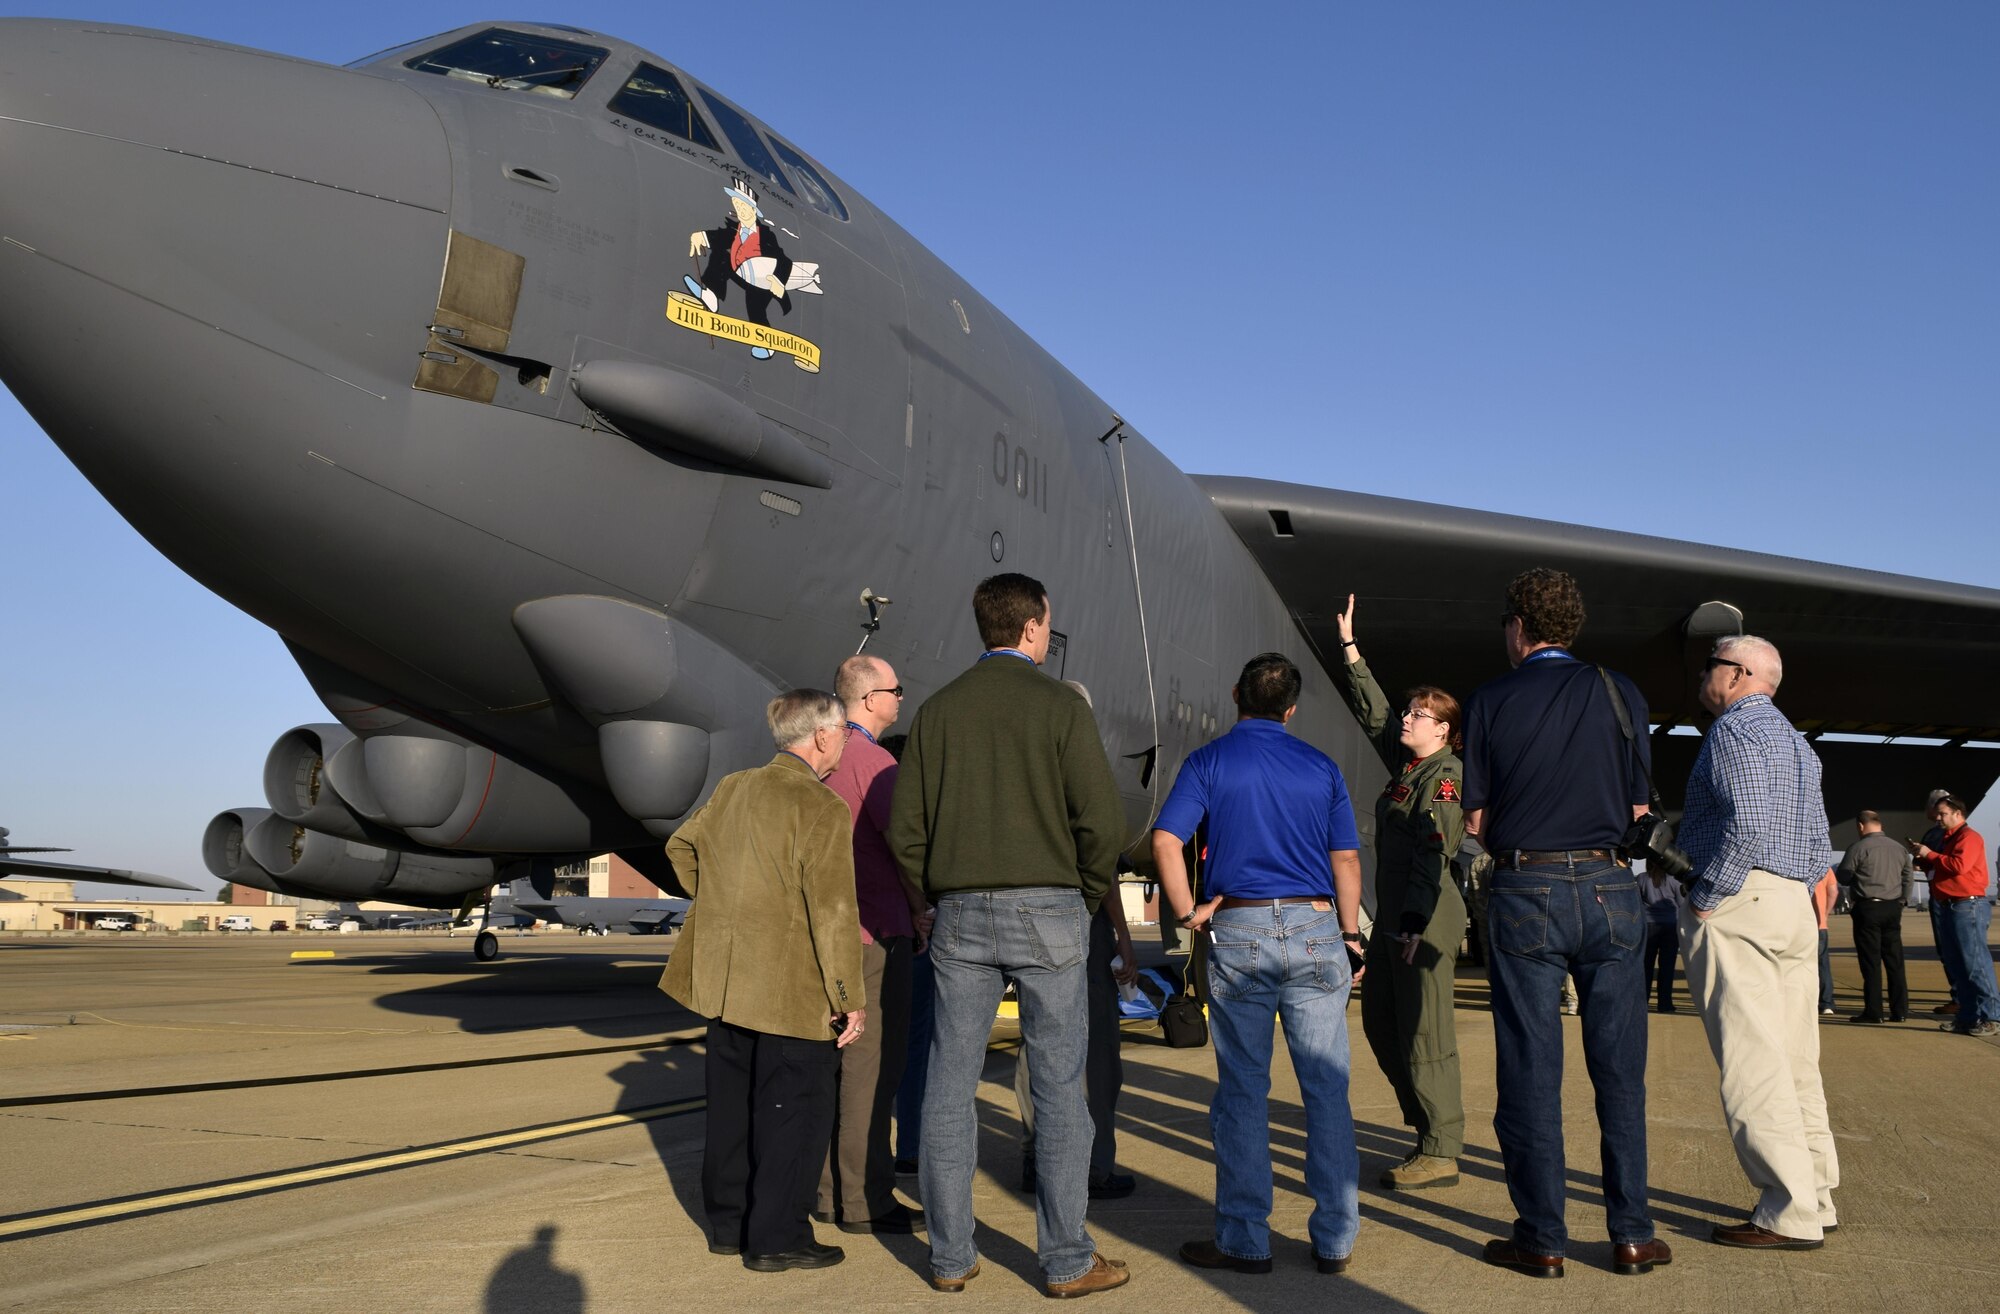 First Lt. Cynthia Ryan, middle, 11th Bomb Squadron B-52 Stratofortress navigator, explains the intricacies of the B-52 to Texas civic leaders Oct. 28, 2016 at Barksdale Air Force Base, Louisiana. The aircraft tour was part of a two-day civic leader visit sponsored by the 433rd Airlift Wing and hosted by the 307th Bomb Wing. (U.S. Air Force photo by Tech. Sgt. Lindsey Maurice)  